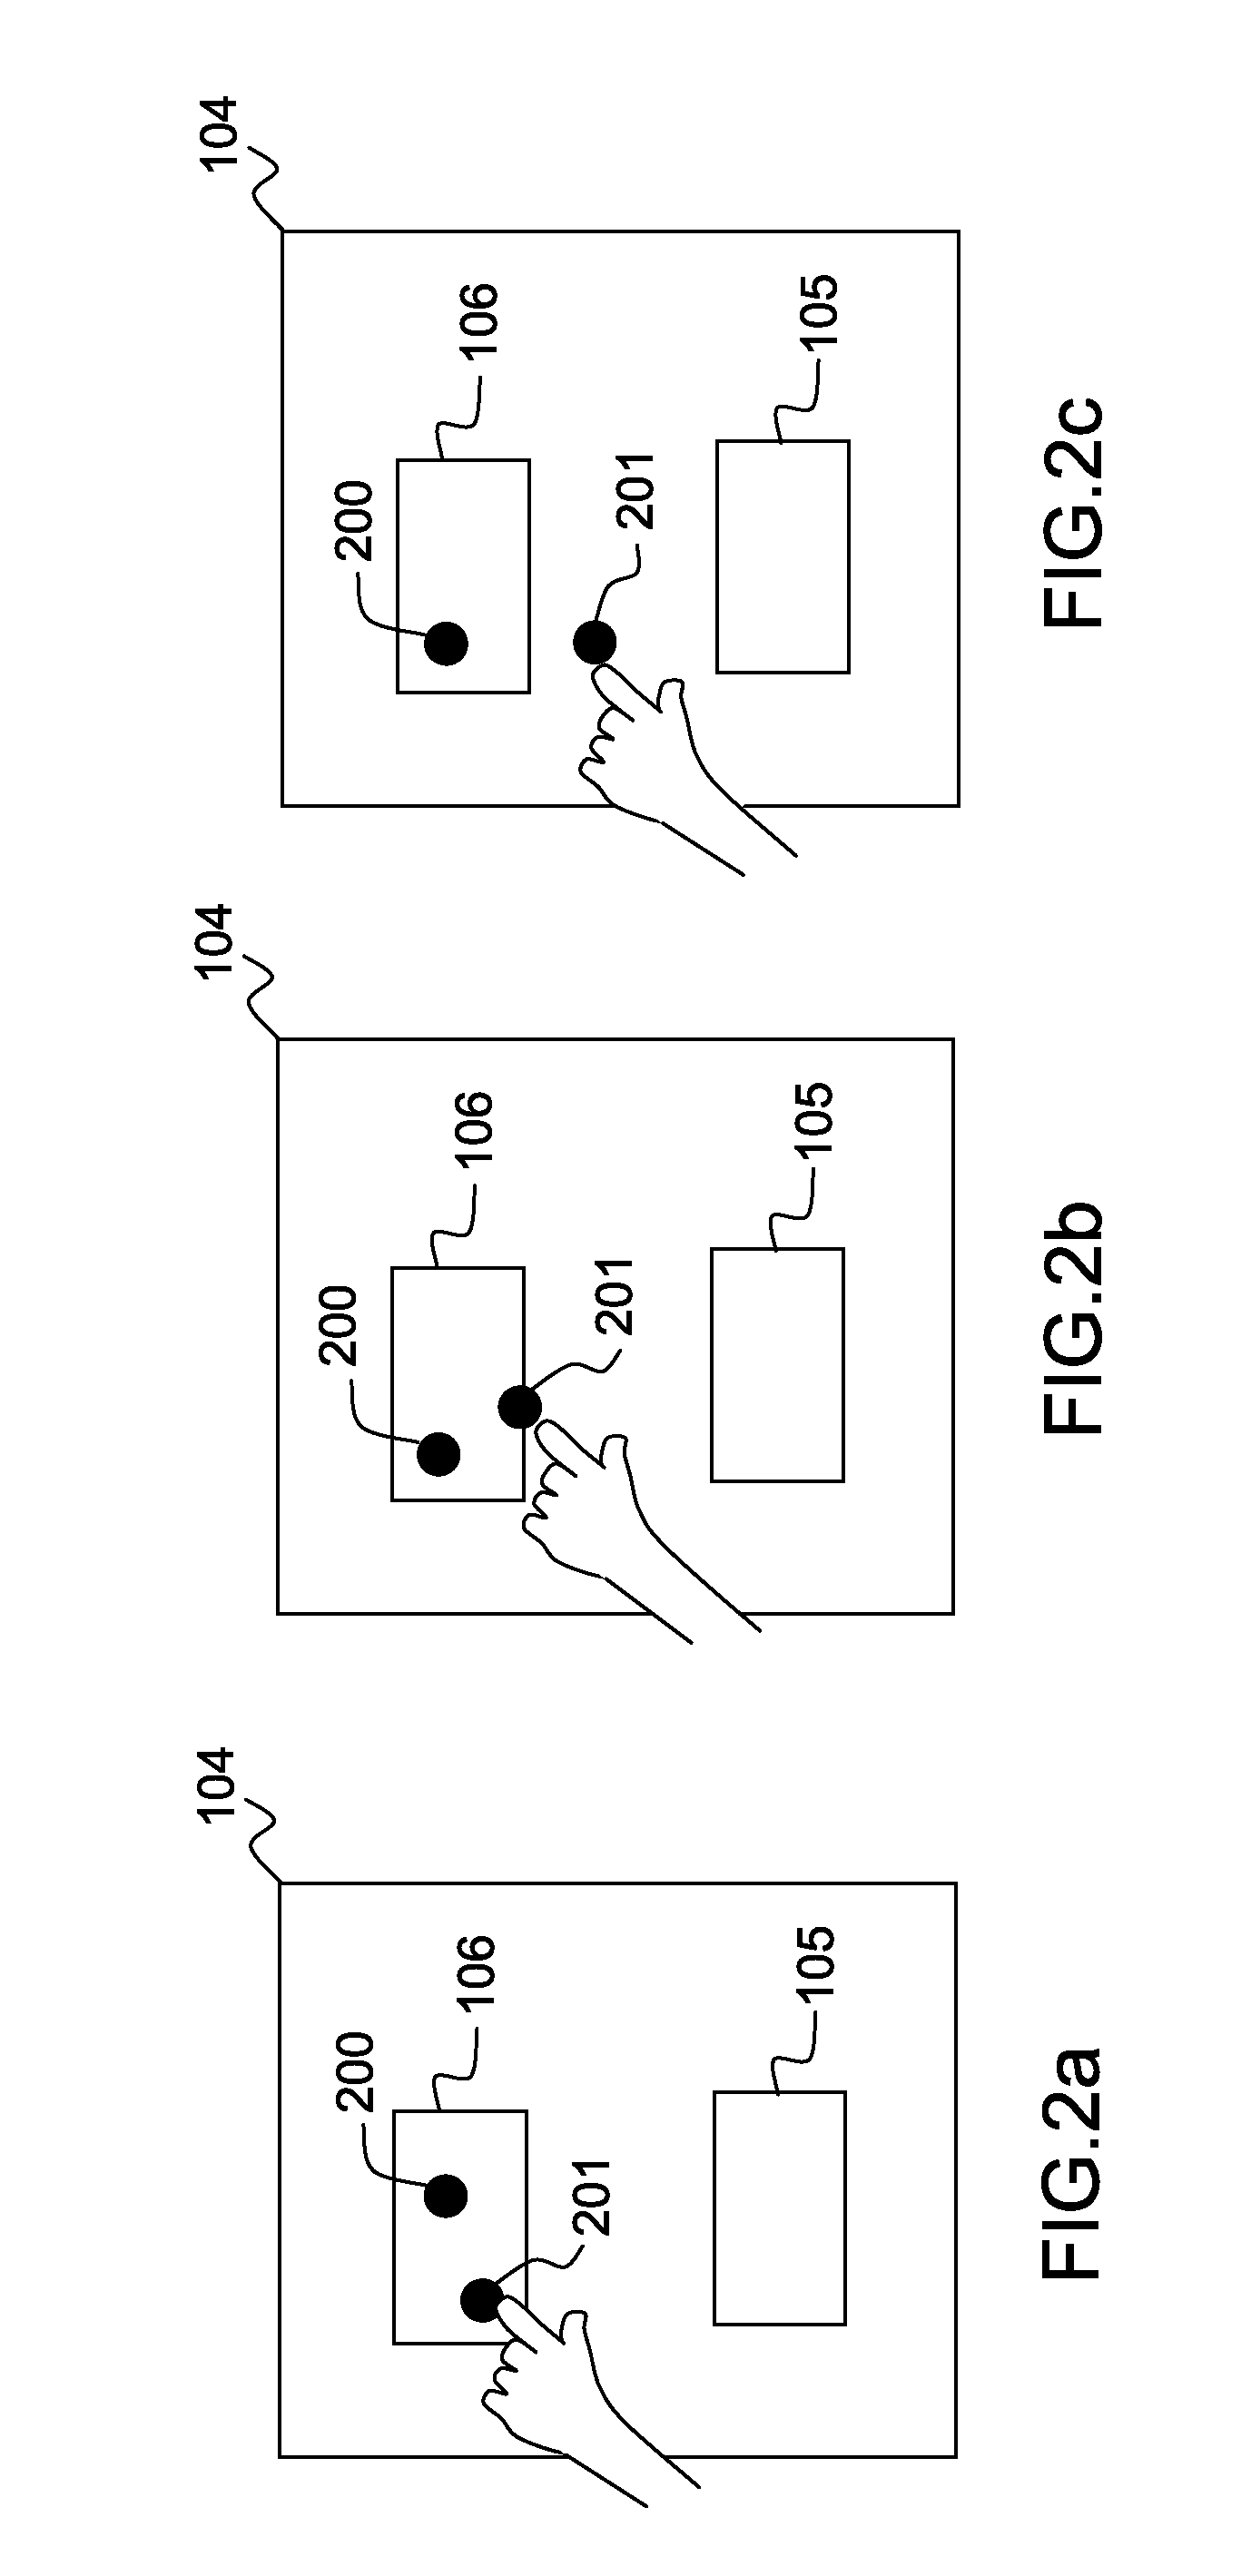 Display method through a head mounted device